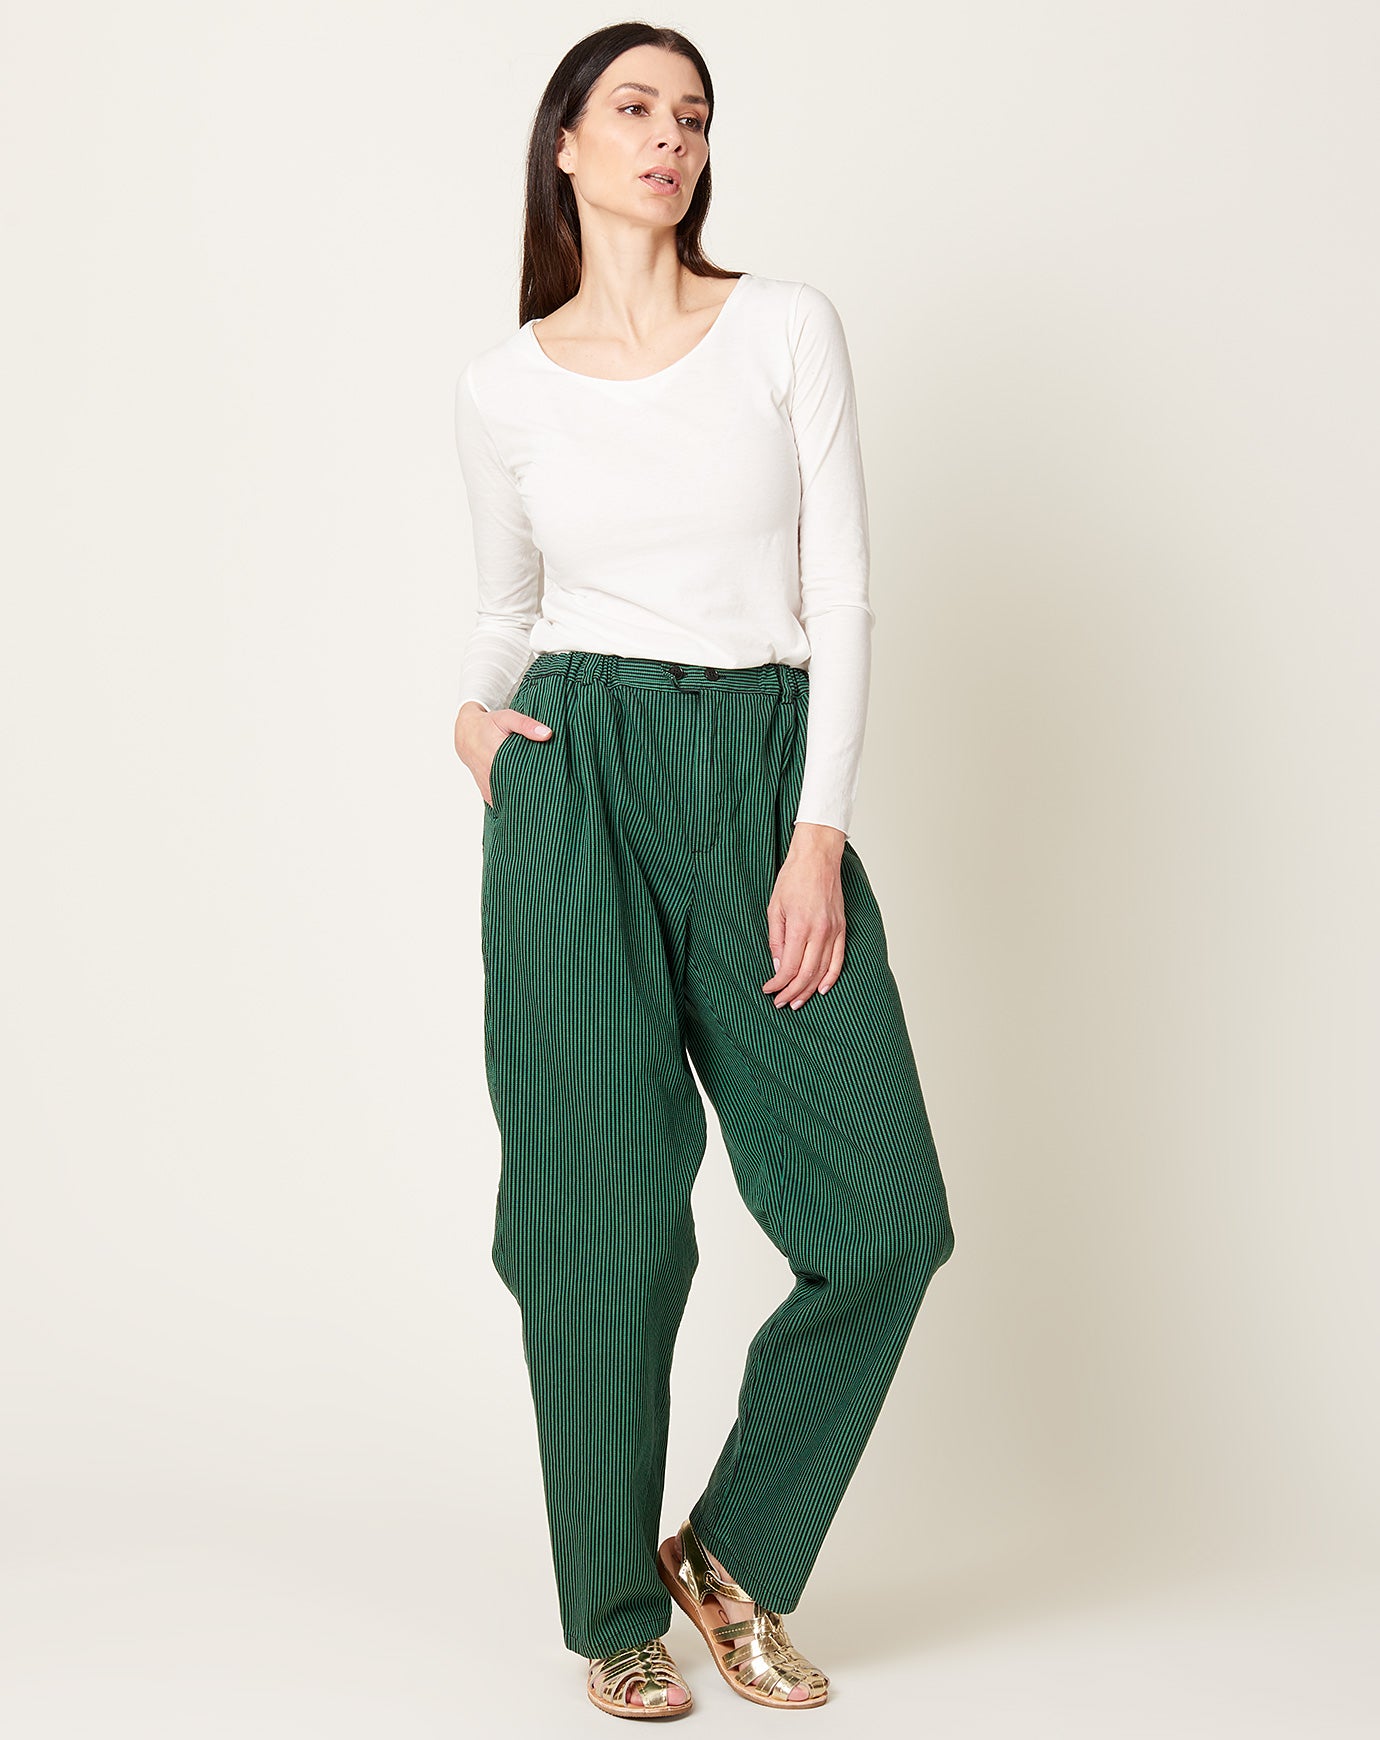 Sultan Wash Striped Butcher Baggy Pant in Faded Green